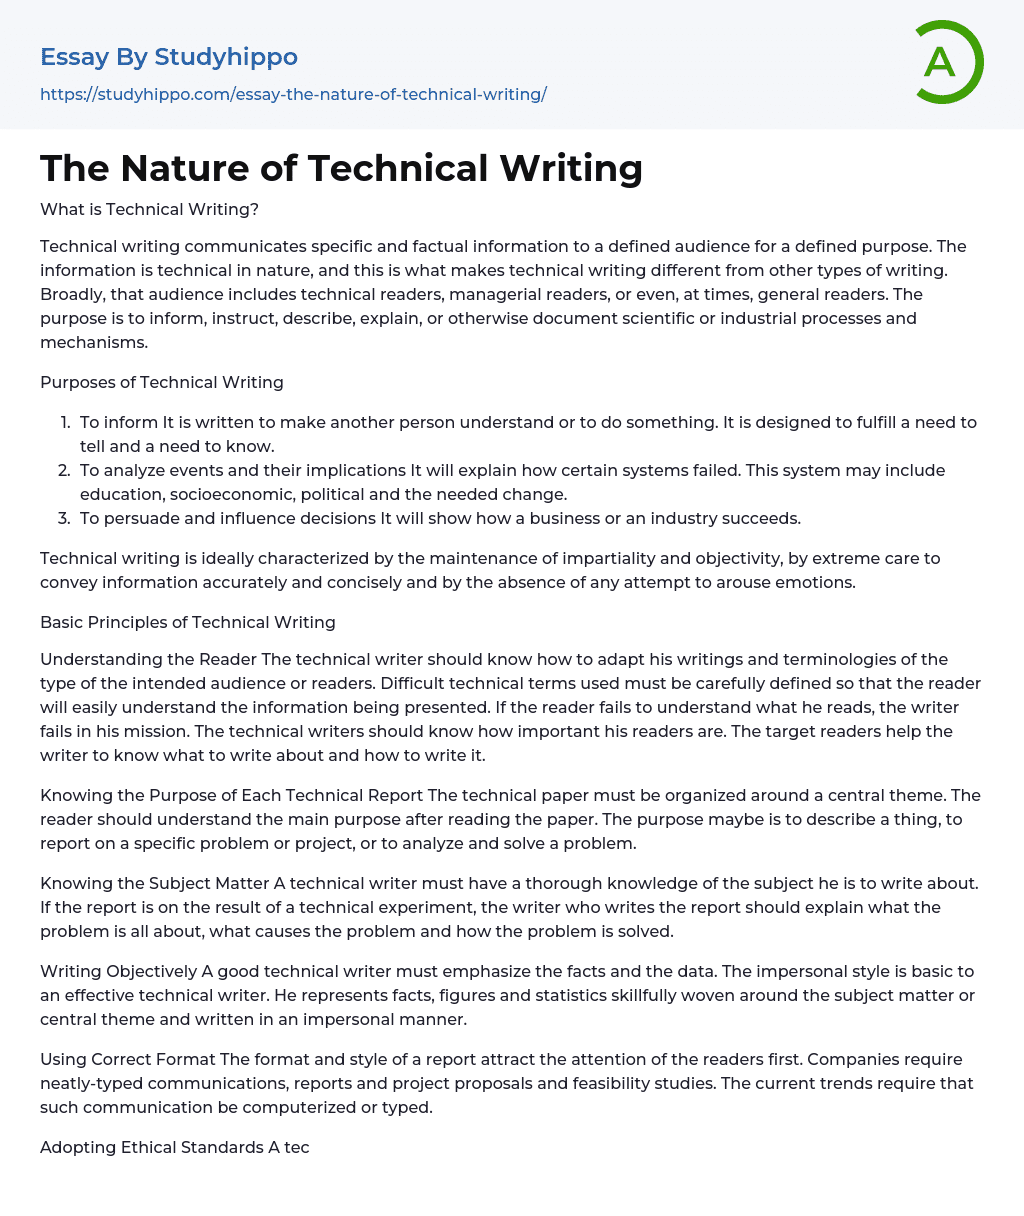 technical writing essay questions